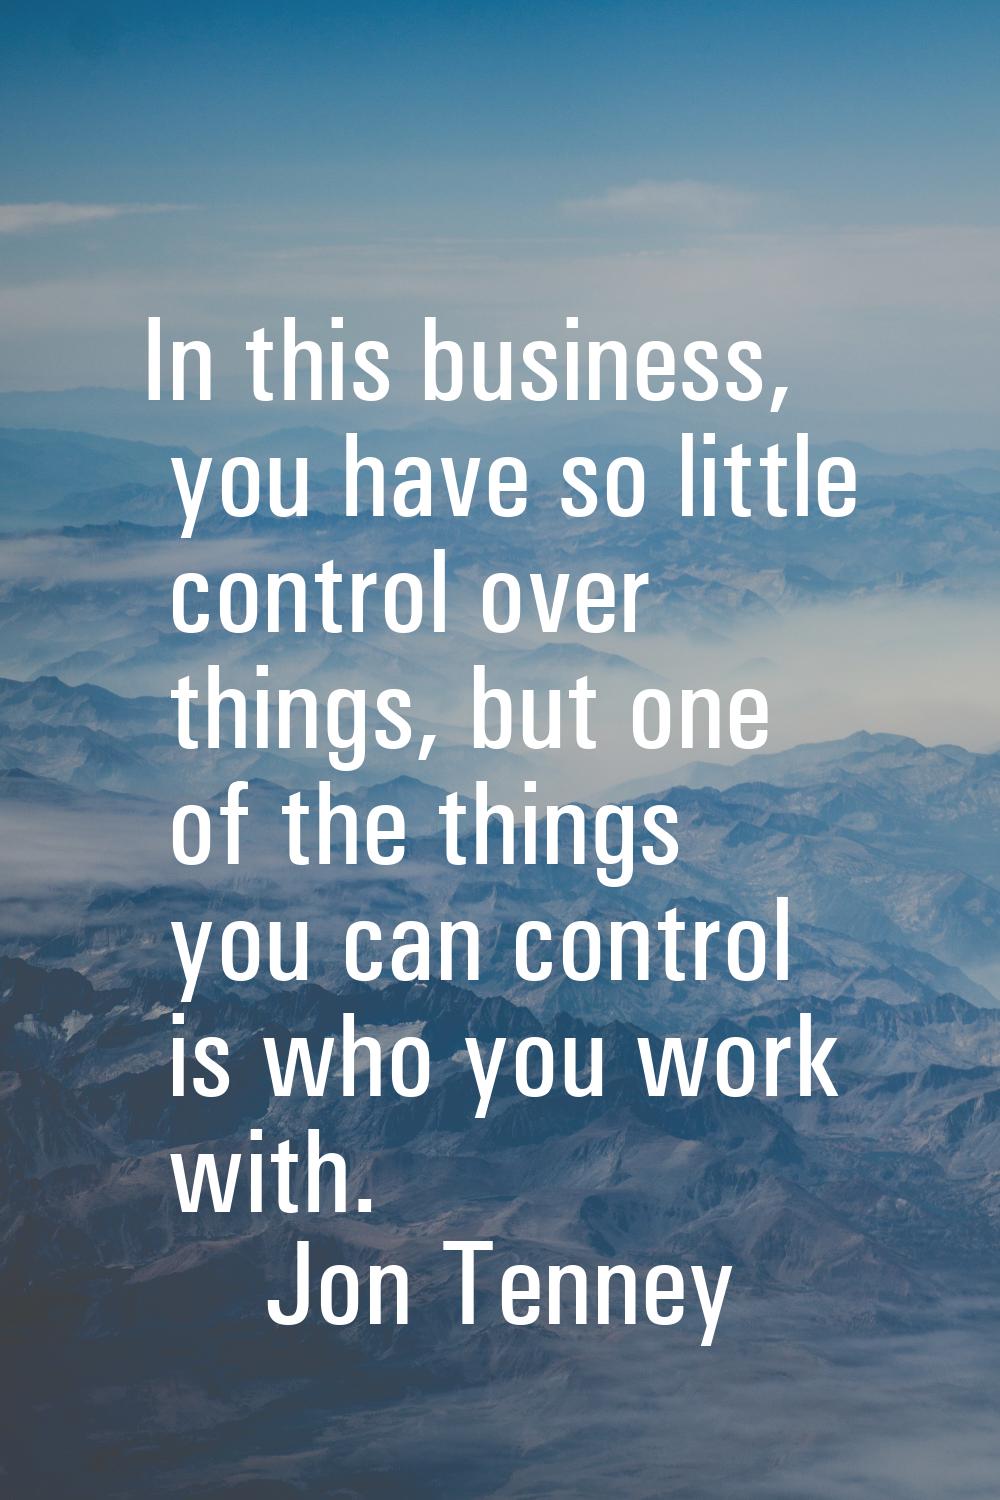 In this business, you have so little control over things, but one of the things you can control is 